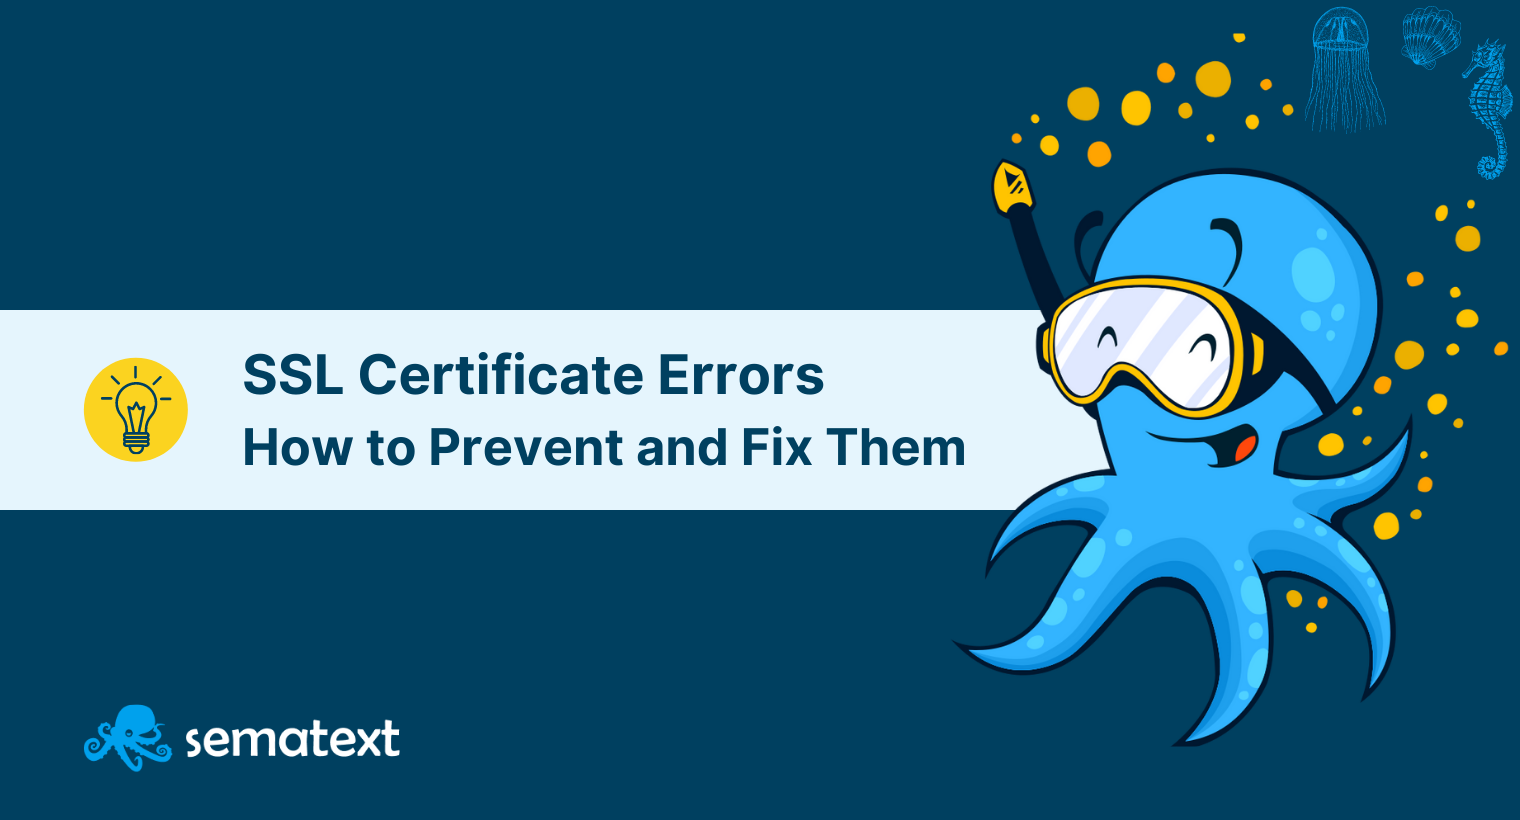 What Are SSL Certificate Errors: Causes & Best Practices on How to Prevent and Fix Them